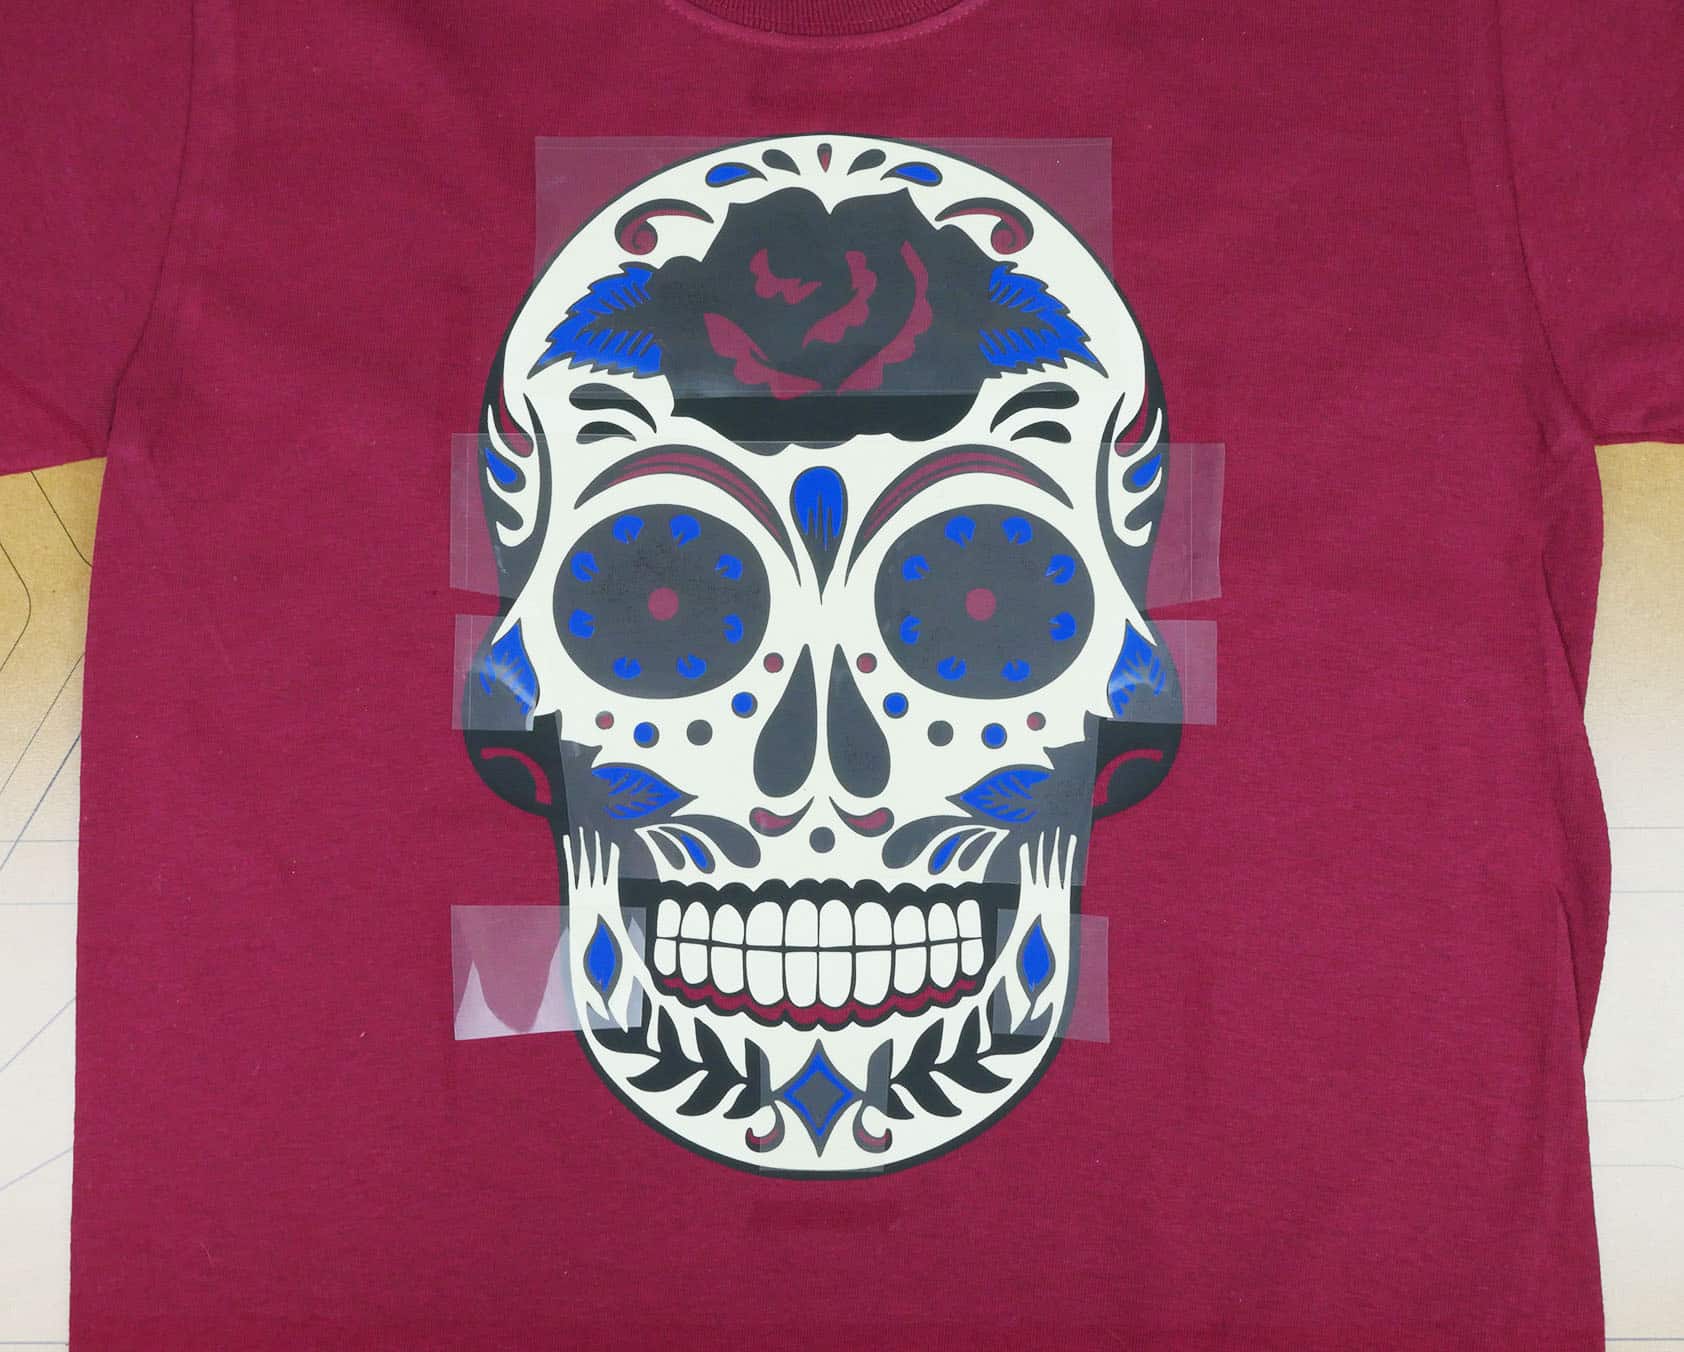 Showing layering the Royal Blue ThermoFlex Plus layer on the sugar skull